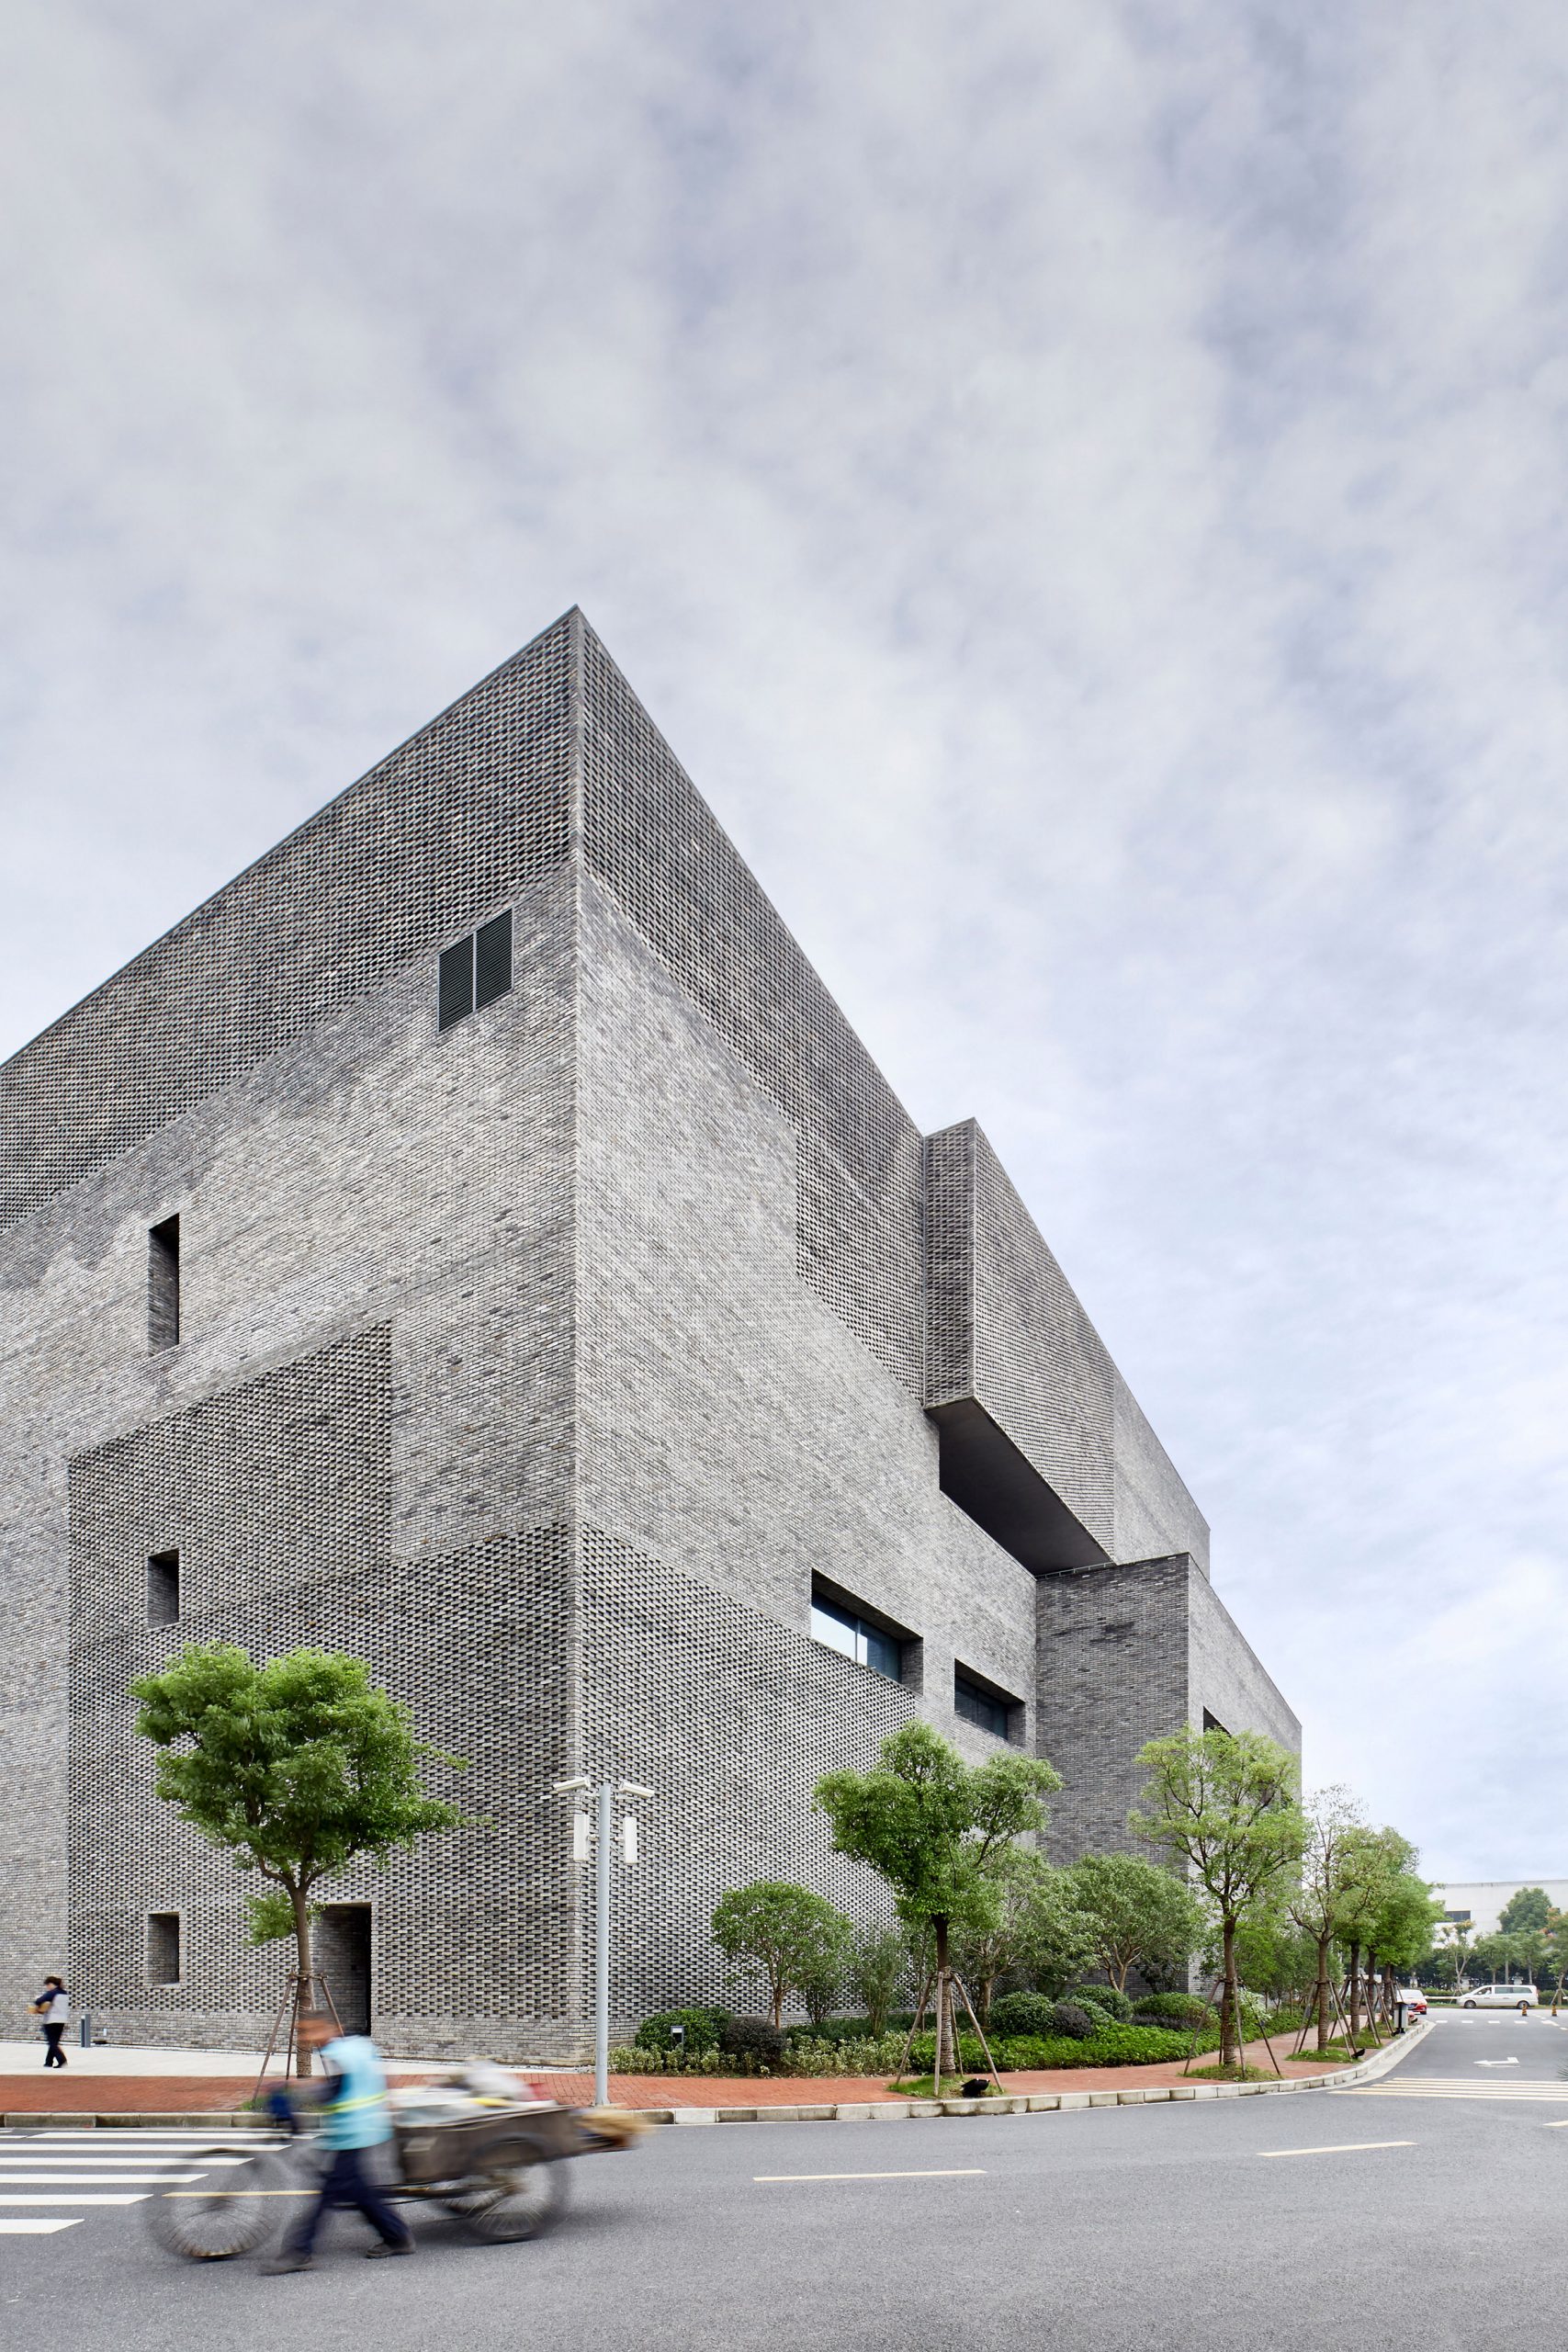 A grey brick research facility at Schindler City campus by Neri&Hu